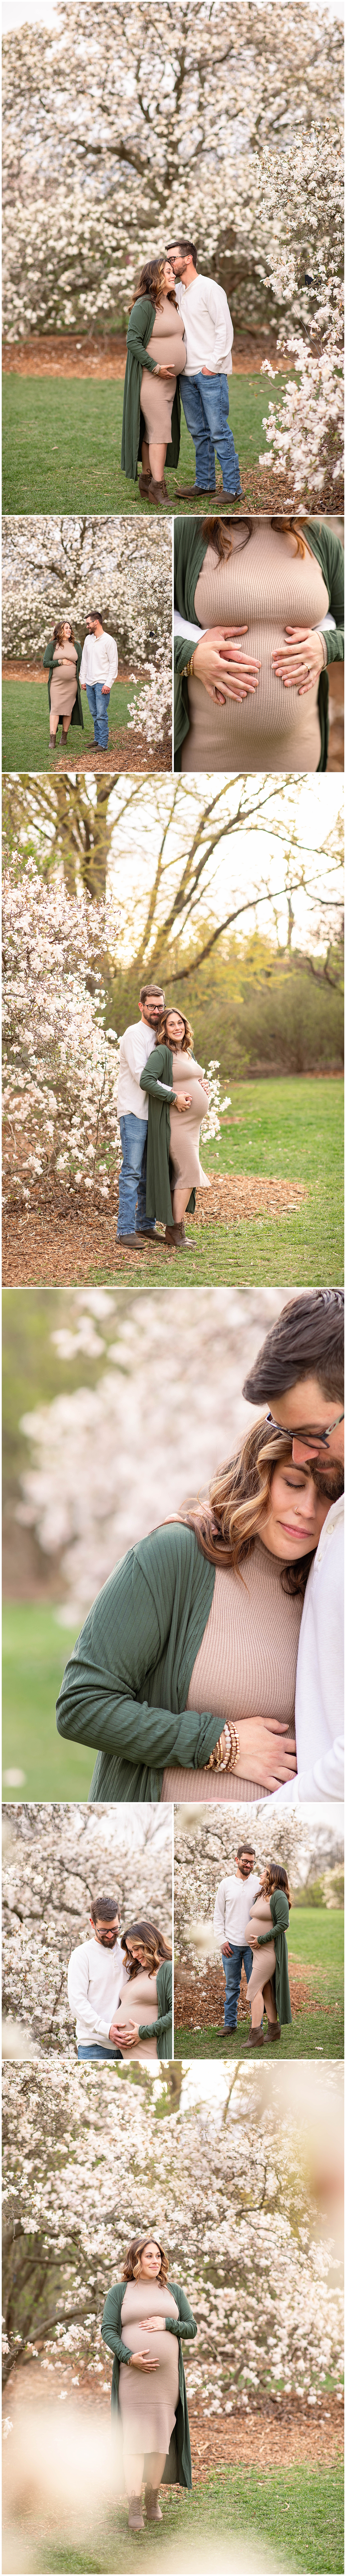 Spring Maternity Session by Kuffel Photography at the UW Madison Arboretum